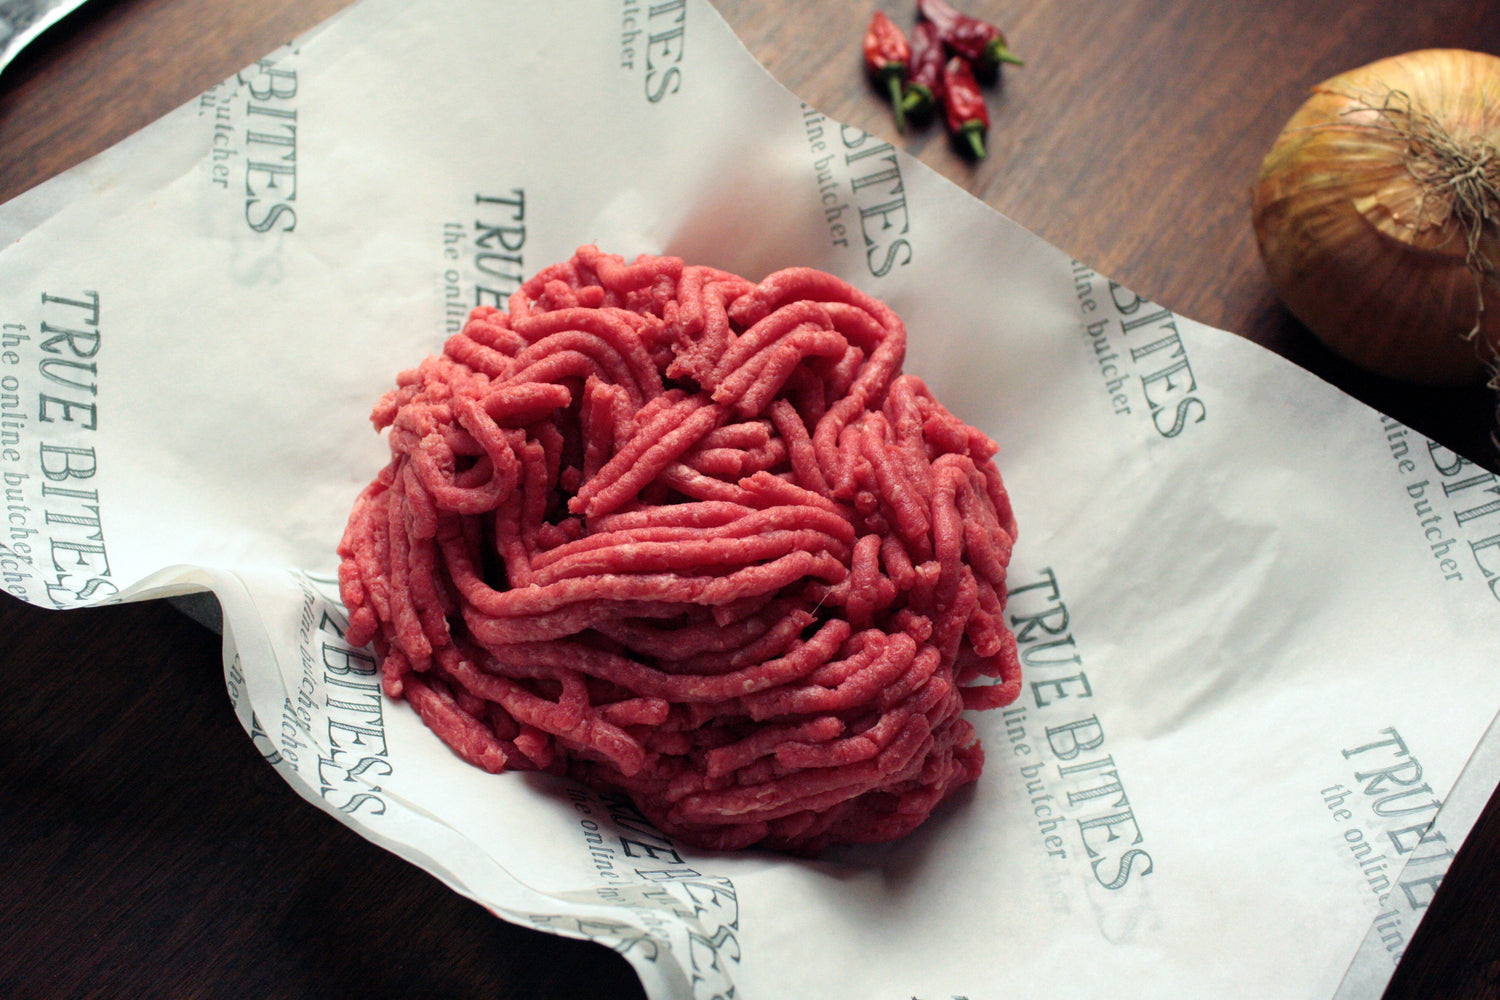 beef mince displayed on true bites greaseproof paper